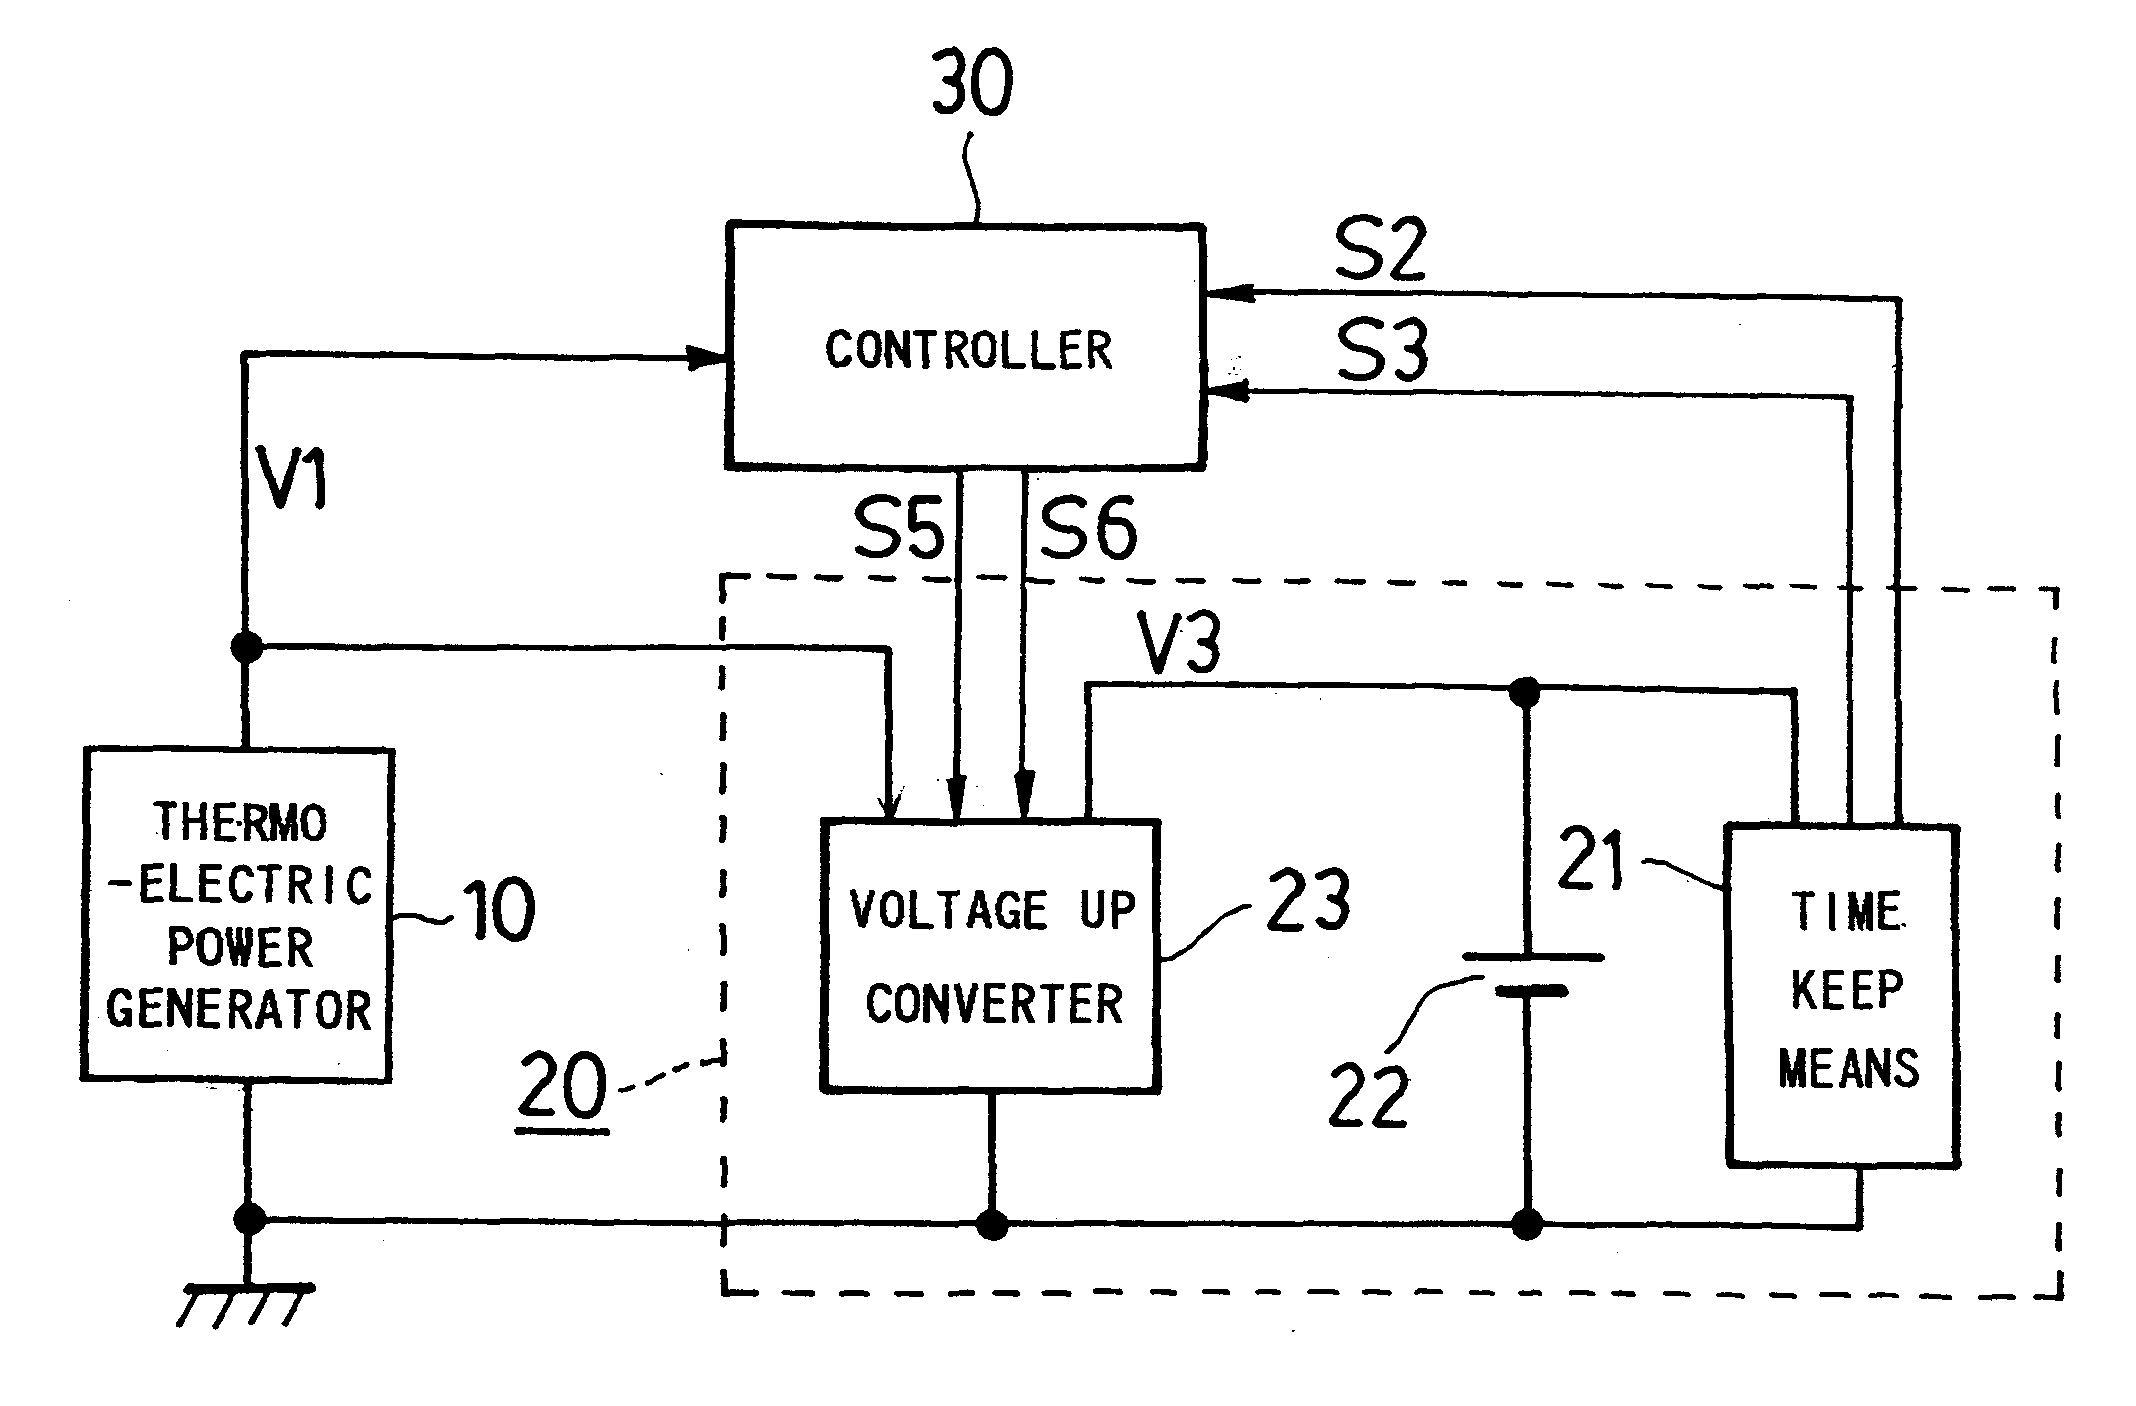 Thermoelectric system